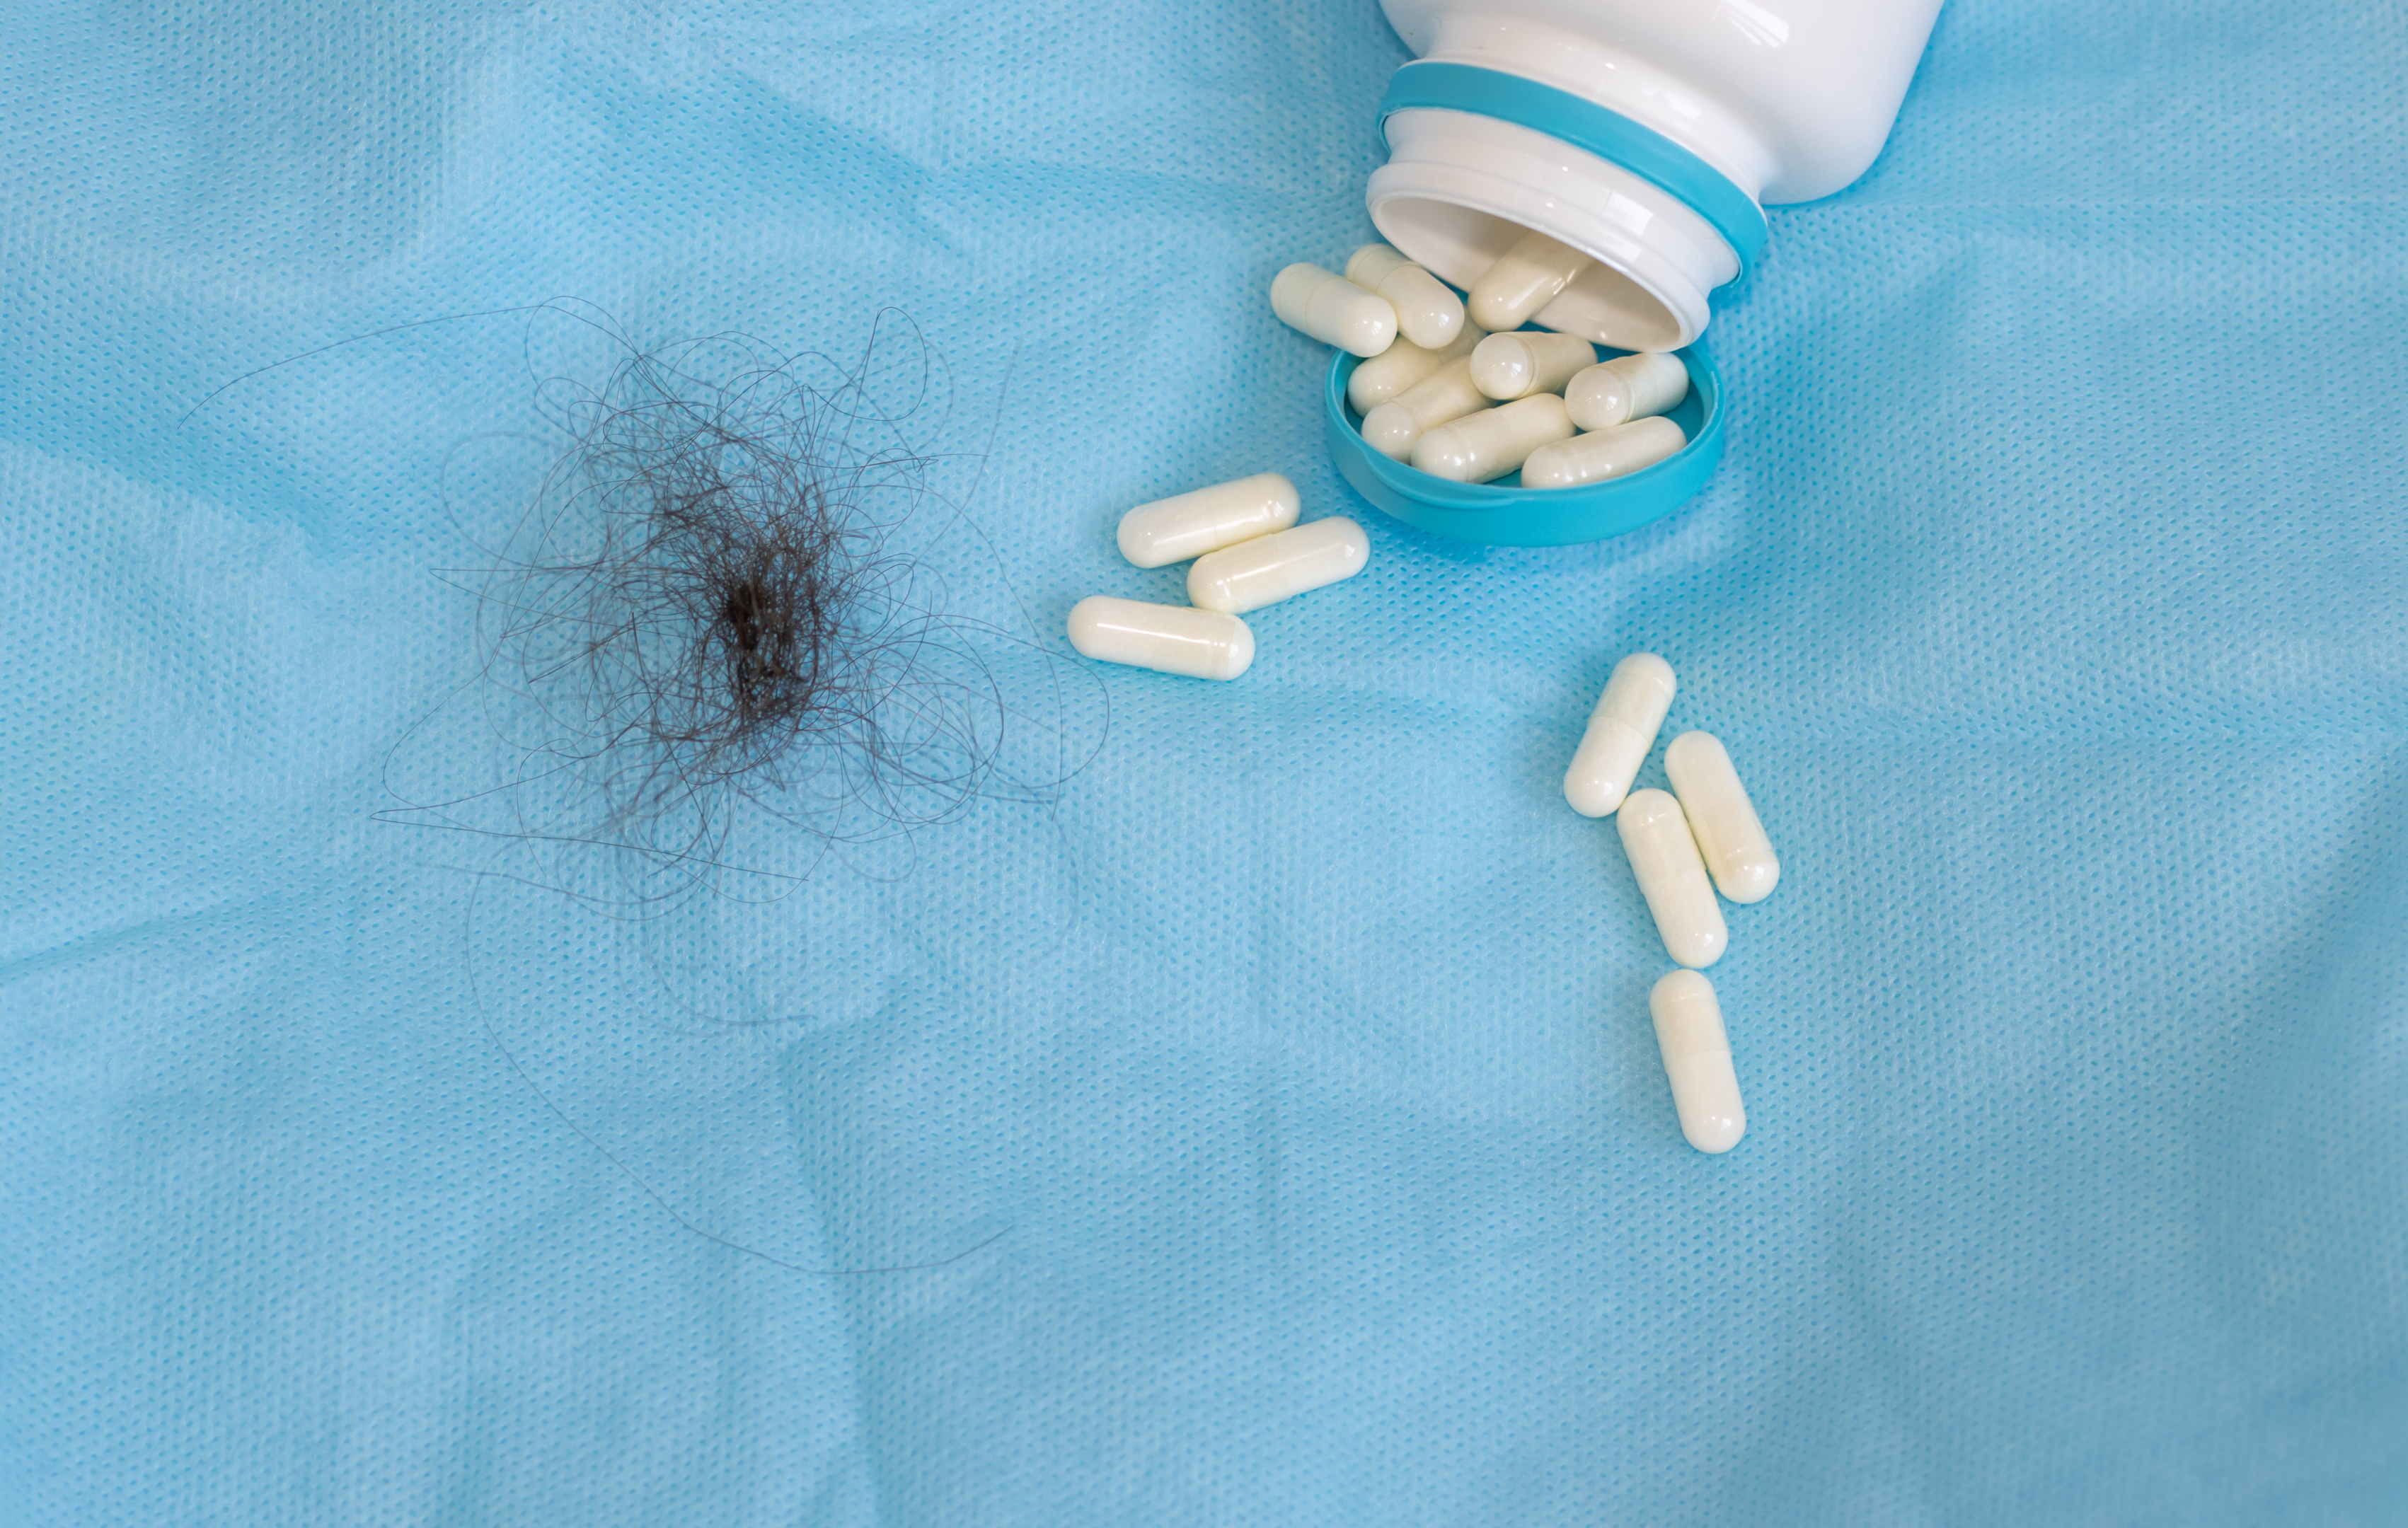 Some drugs also induce hair loss.